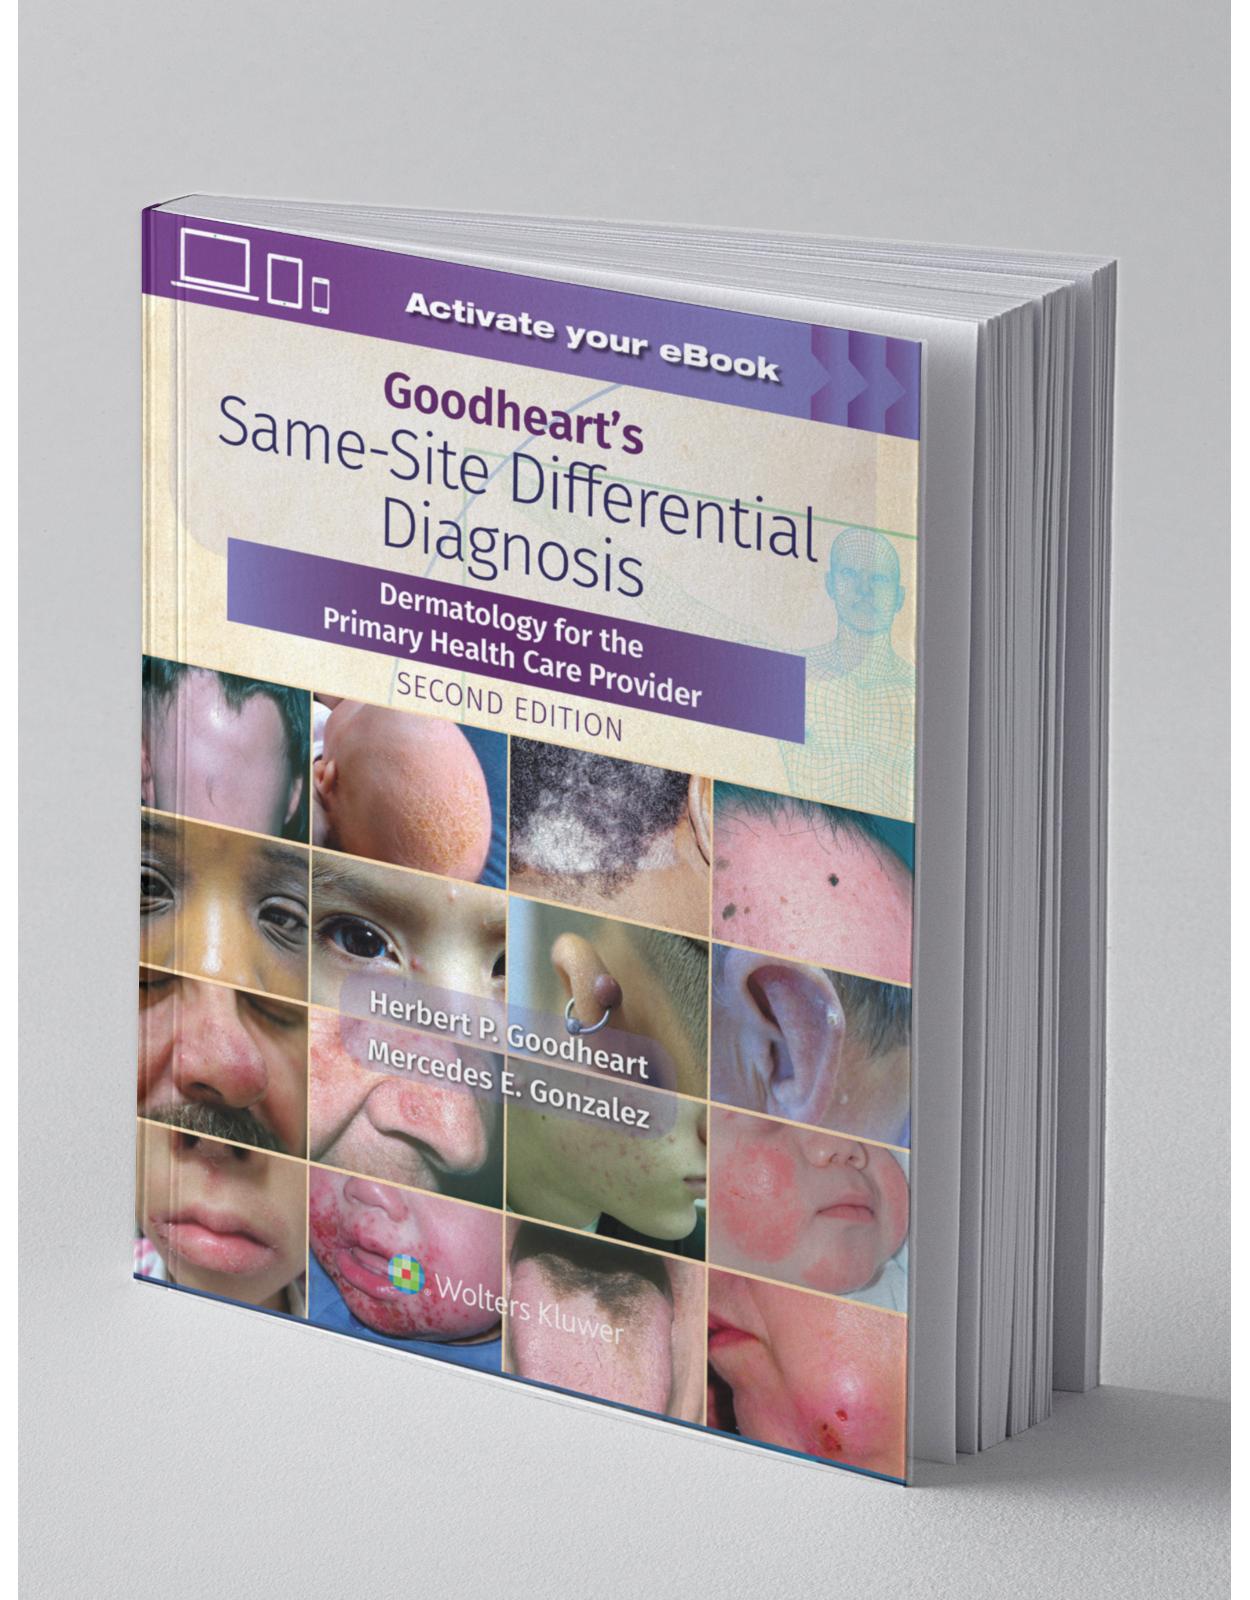 Goodheart’s Same-Site Differential Diagnosis Dermatology for the Primary Health Care Provider, Second edition